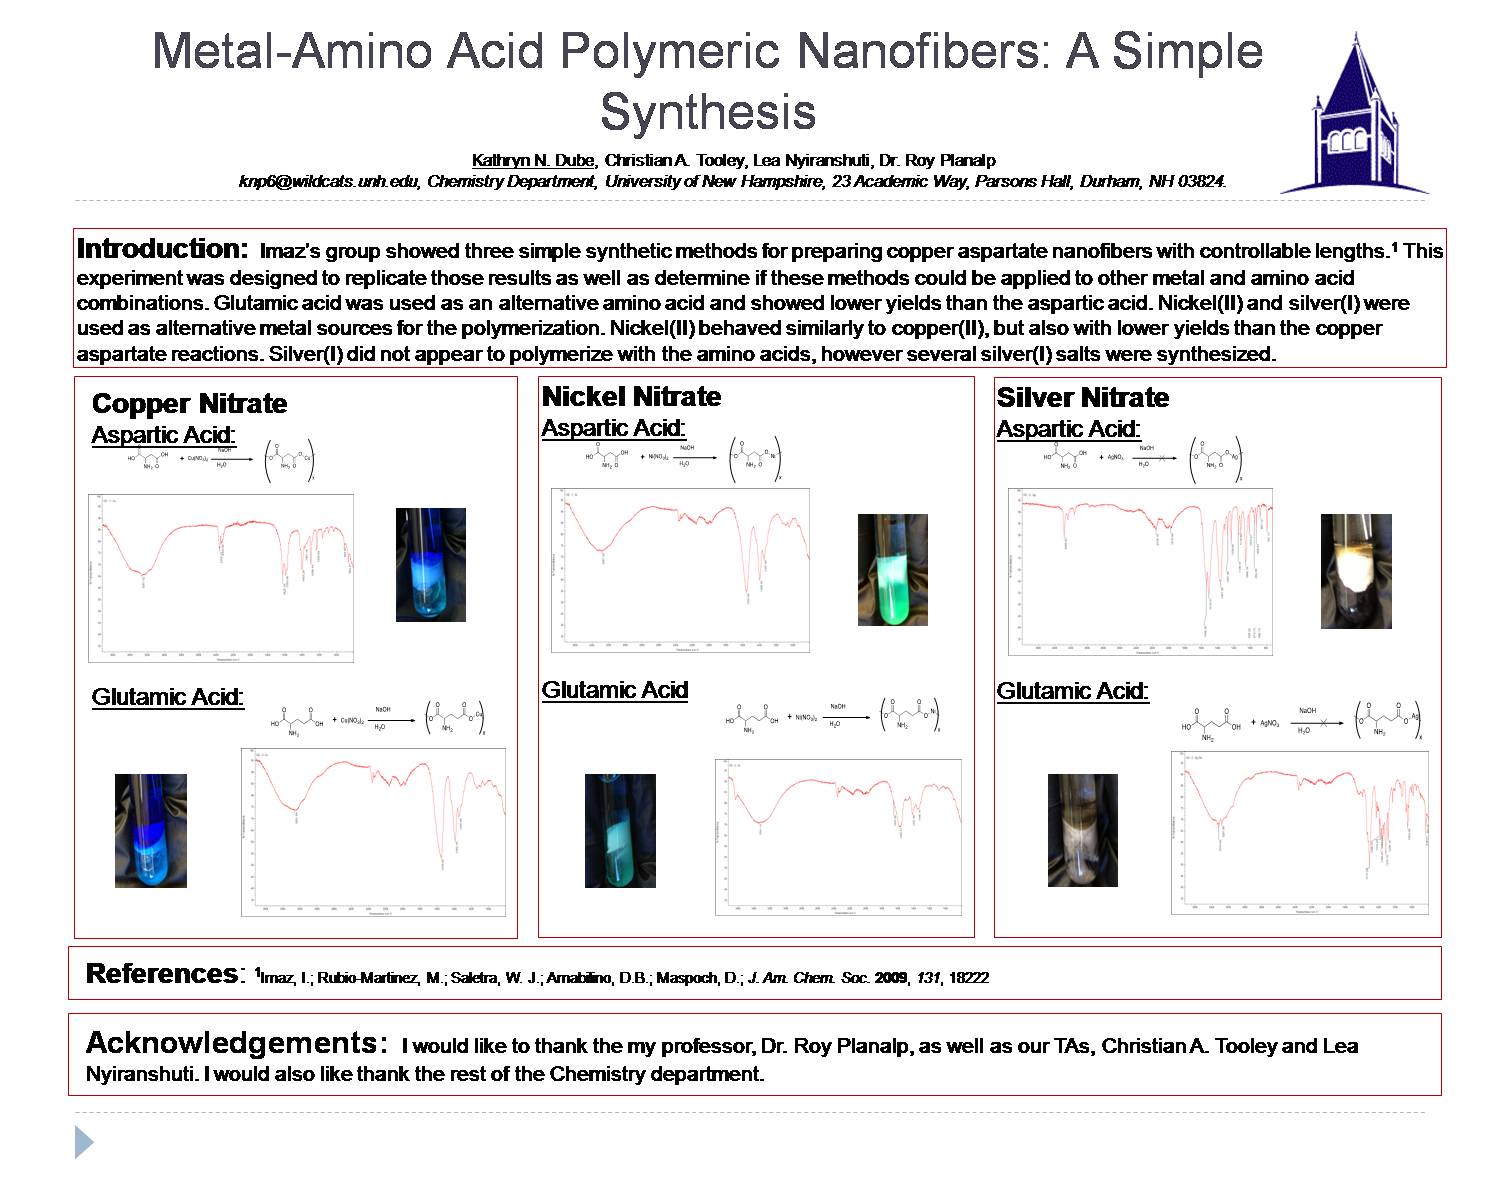 Metal-Amino Acid Polymeric Nanofibers: A Simple Sythesis by knp6